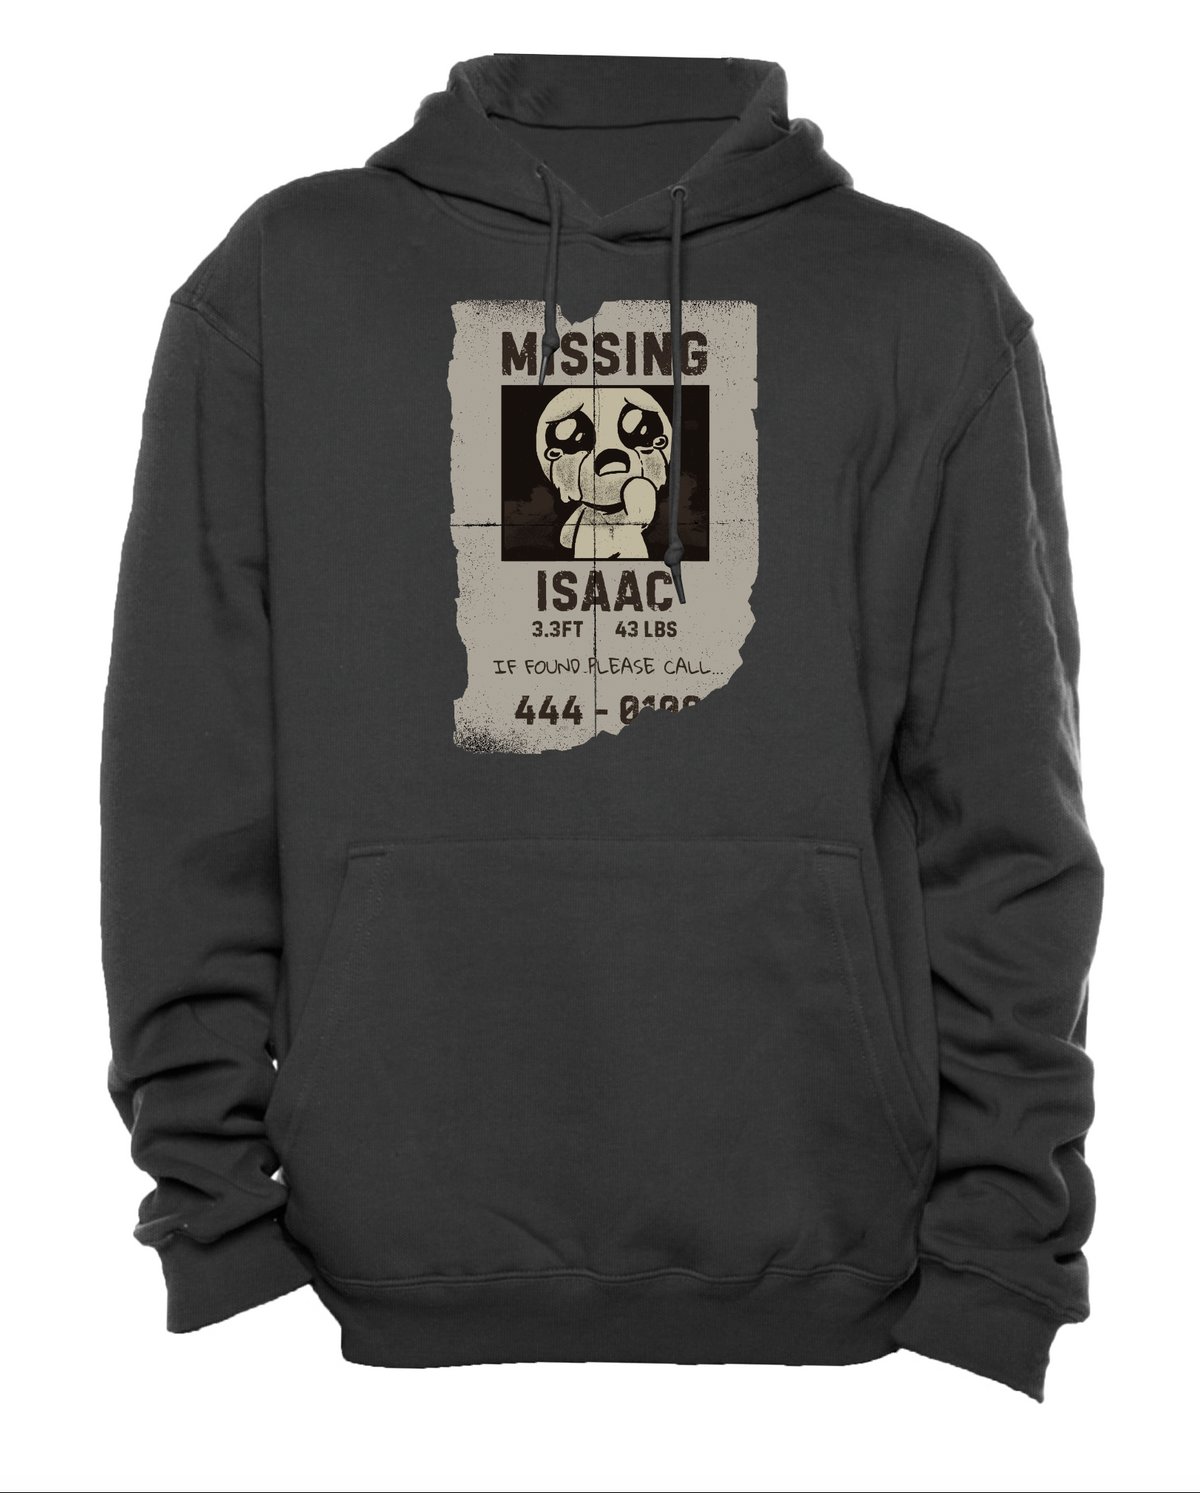 The Binding of Isaac: Isaac Is Missing Hoodie